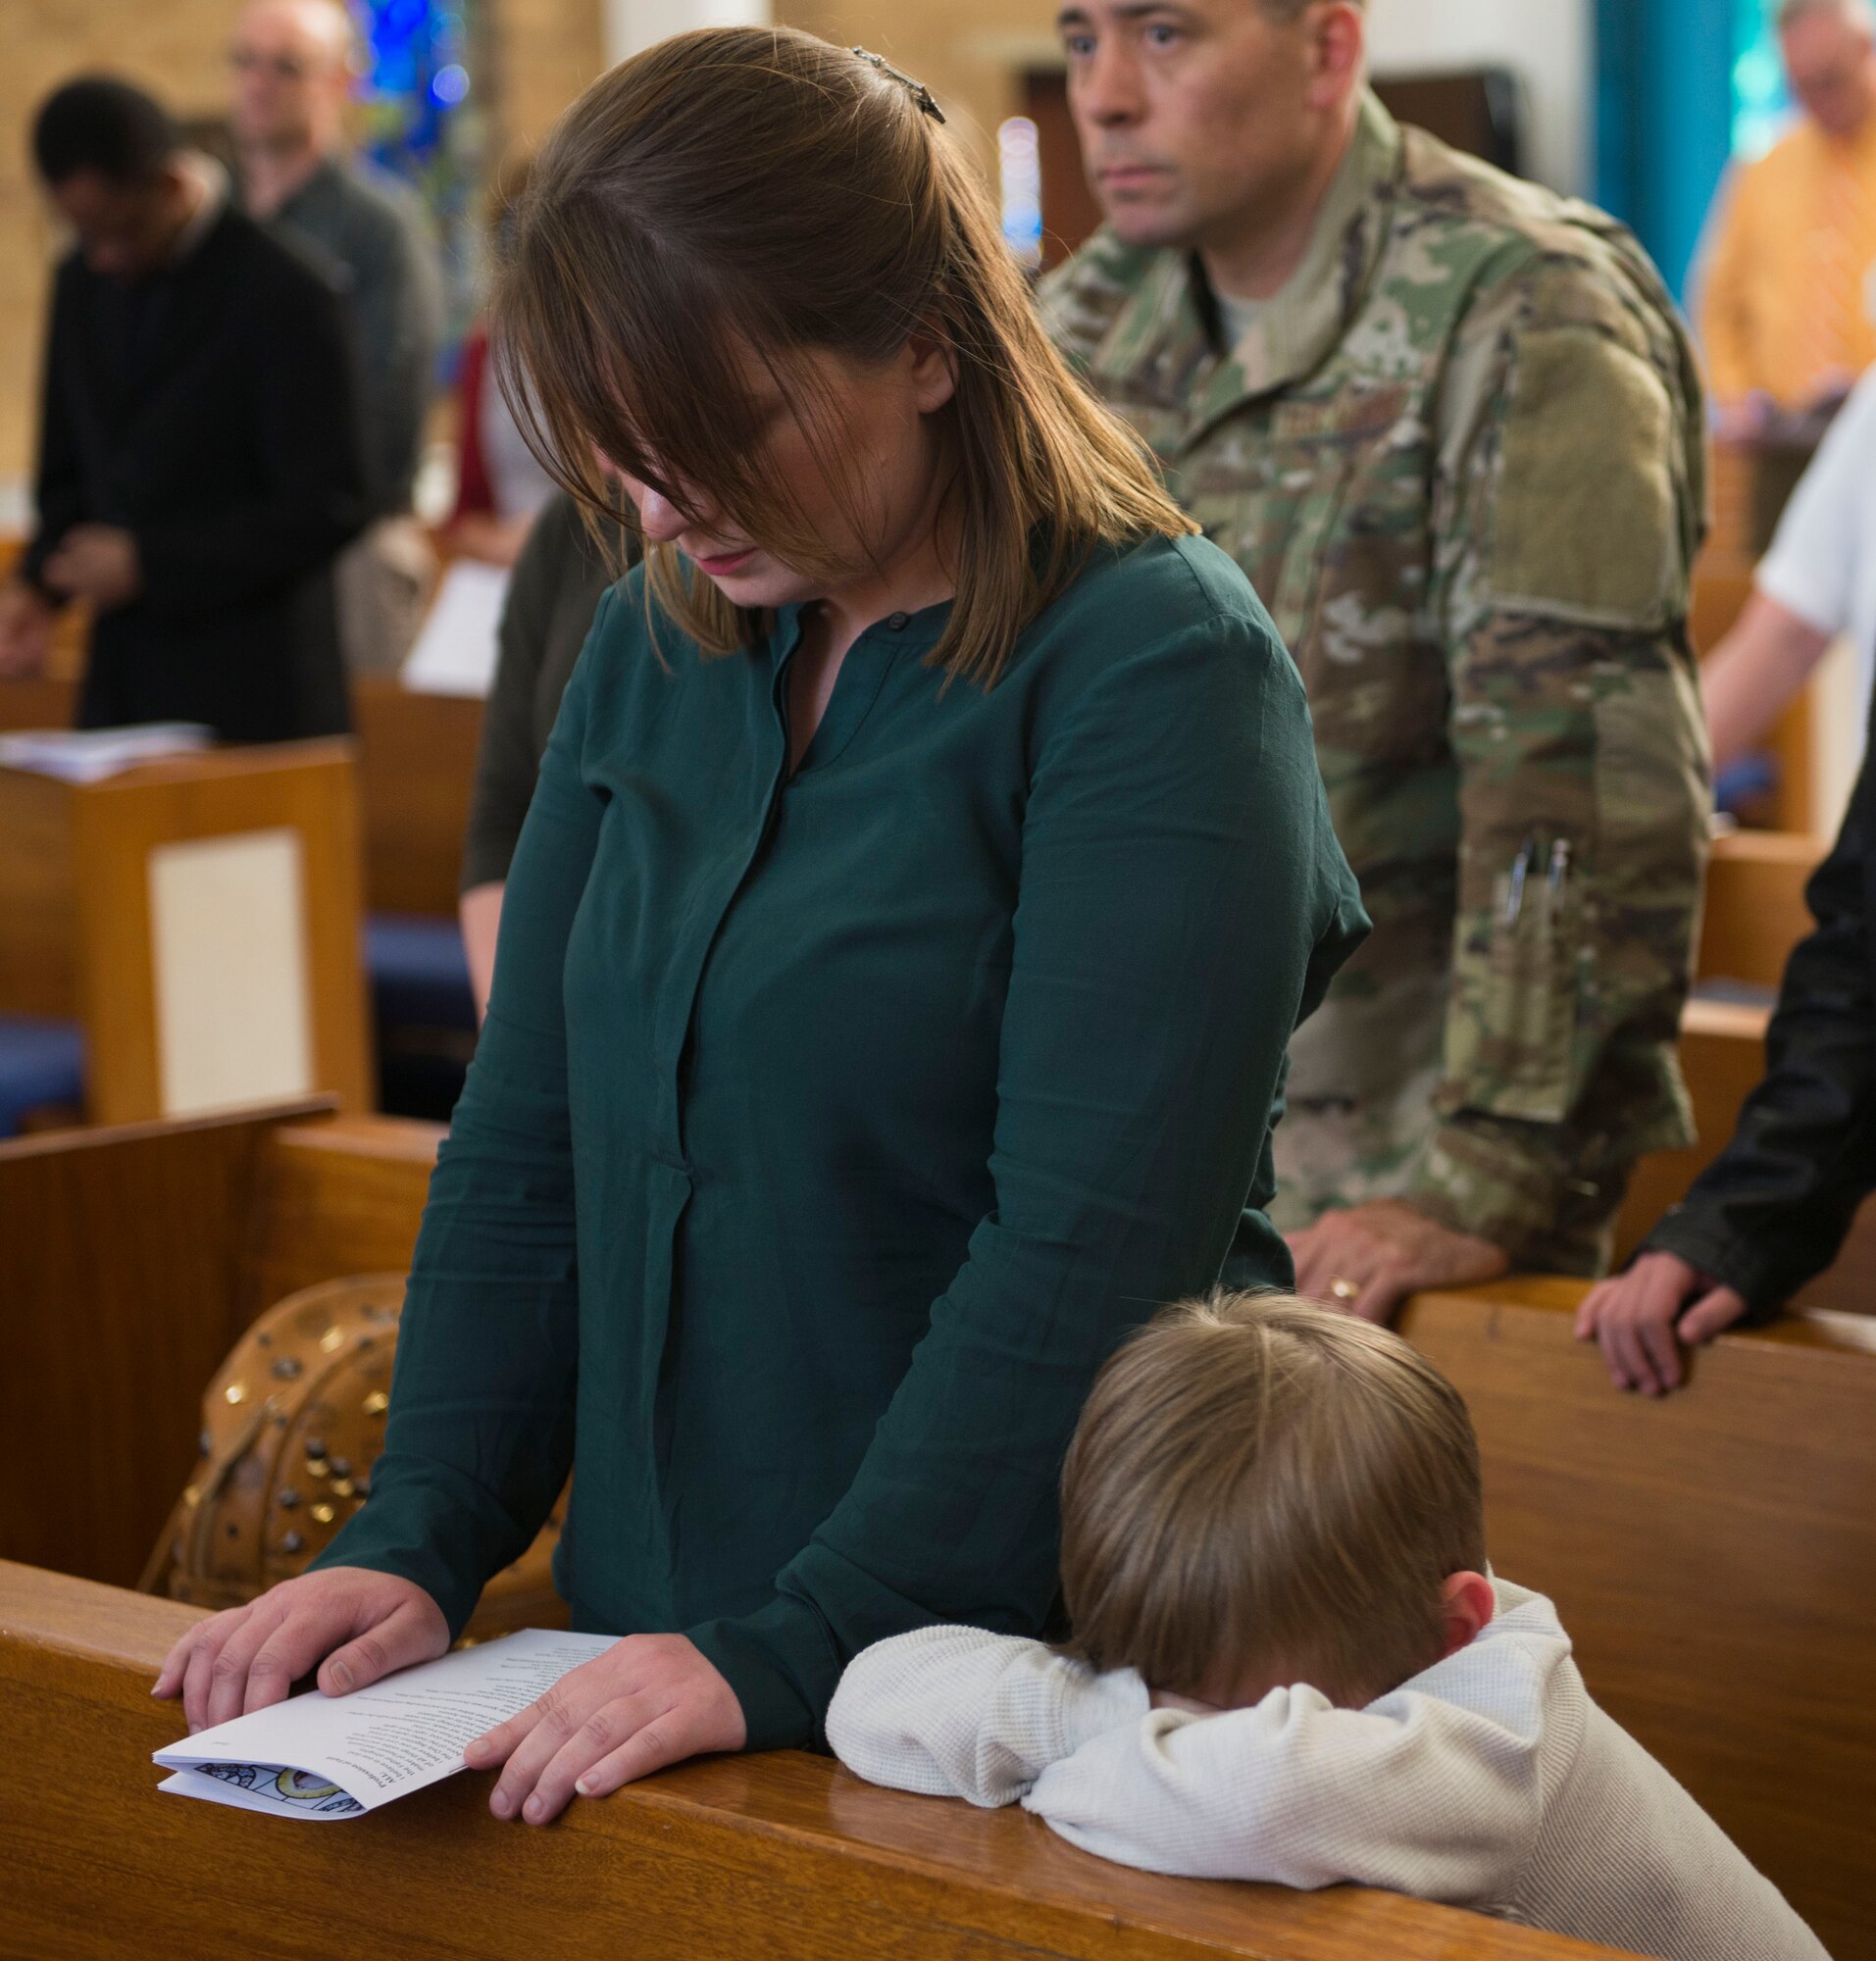 A mother and her son bow their heads in prayer during the final Catholic mass at RAF Mildenhall, England, May 14, 2018. The Catholic Parish falls under Our Lady of Walsingham Catholic Community, and has been a part of RAF Mildenhall since 1955. (U.S. Air Force photo by Airman 1st Class Alexandria Lee)